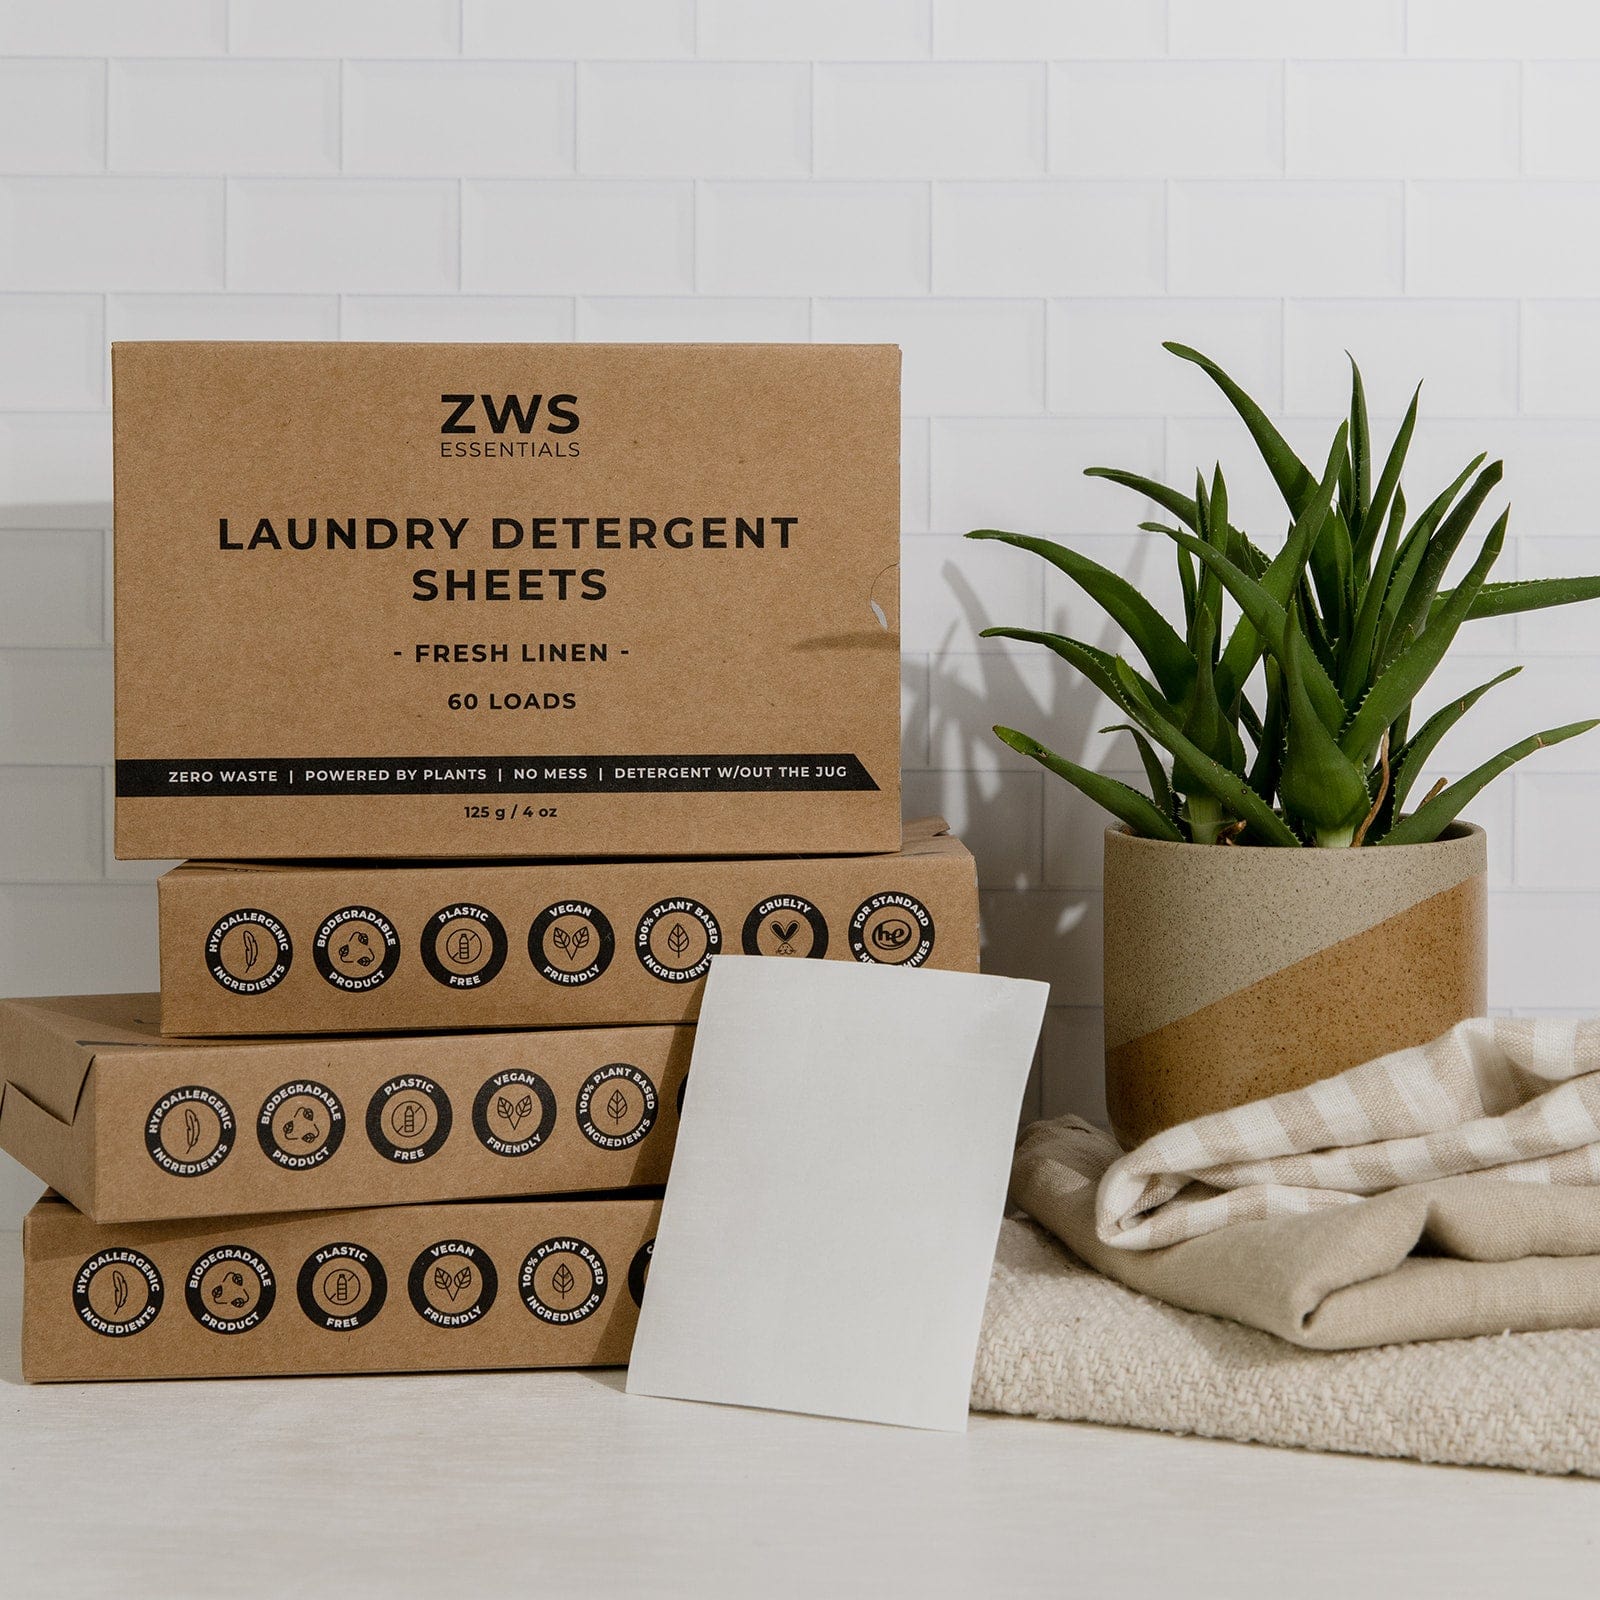 9 Laundry Detergent Sheets To Make Laundry Day A Breeze